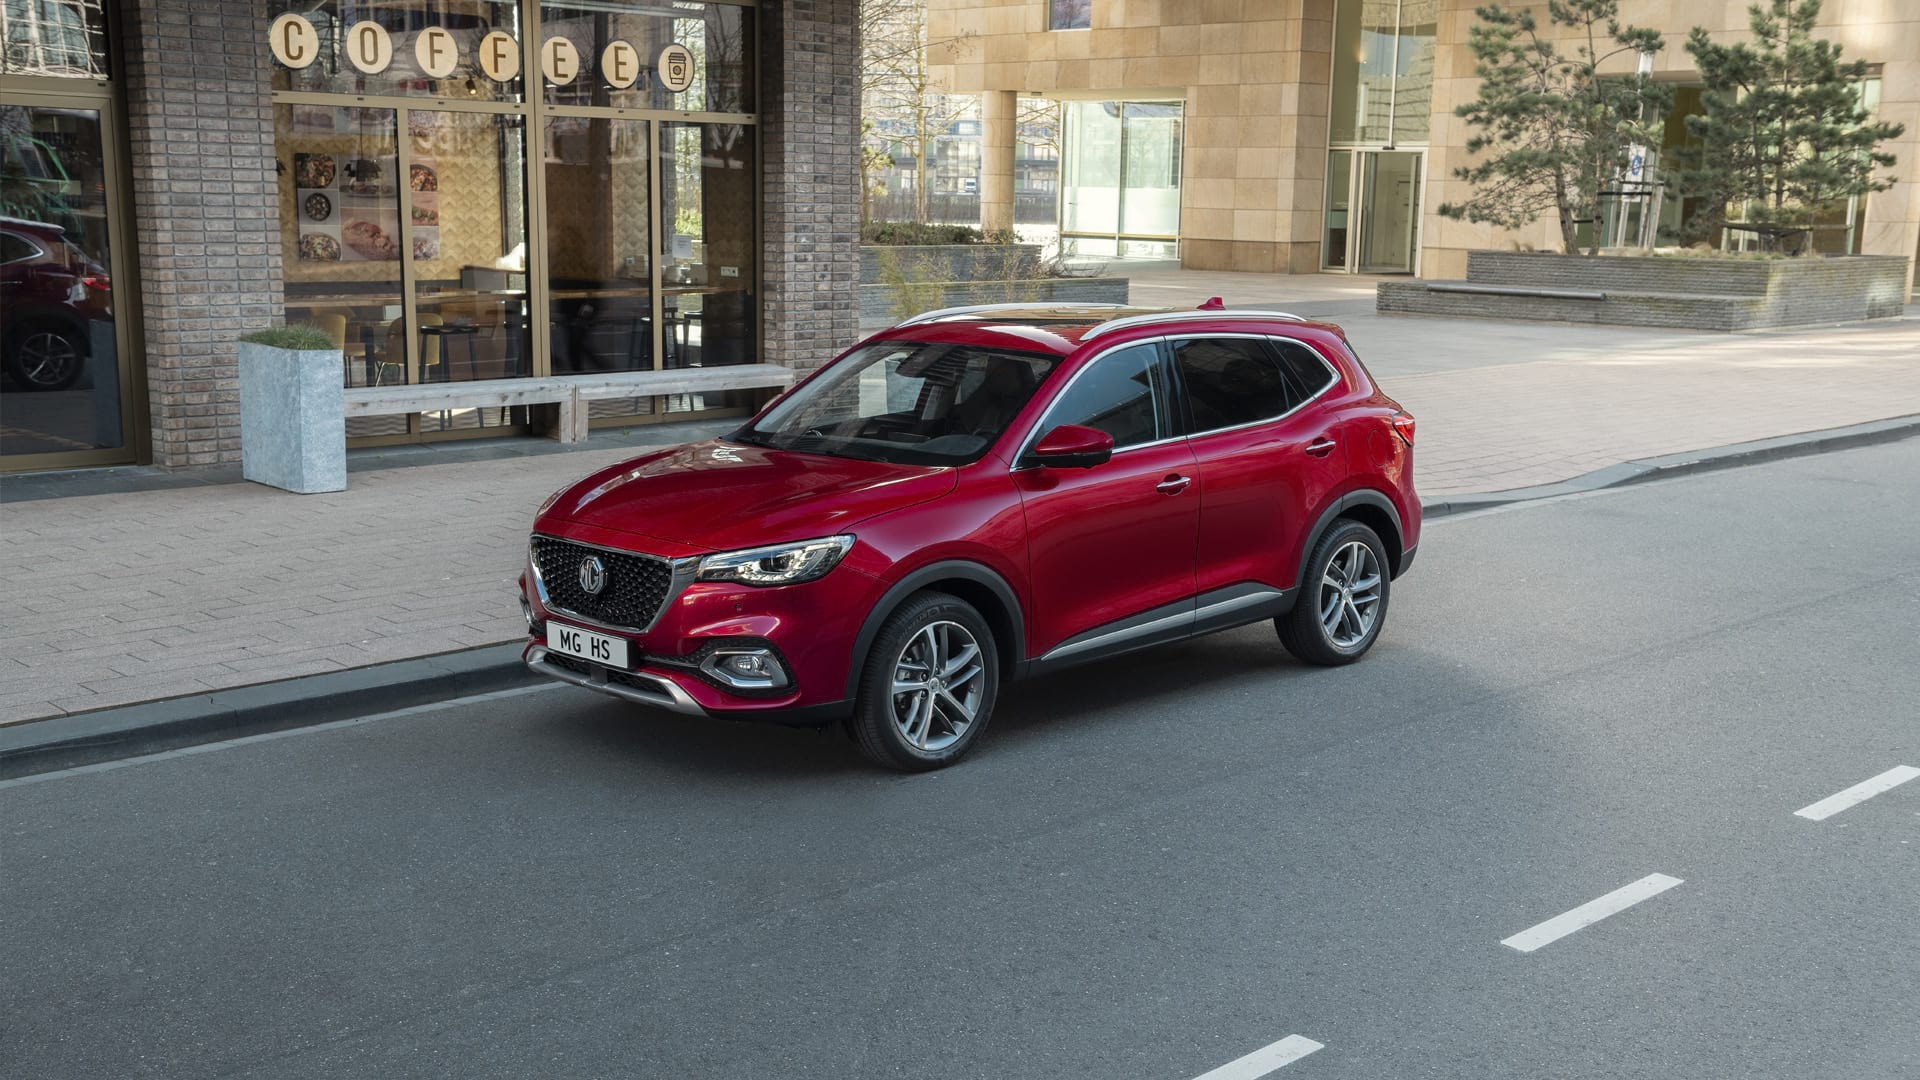 MG HS named UK’s best-selling car in January